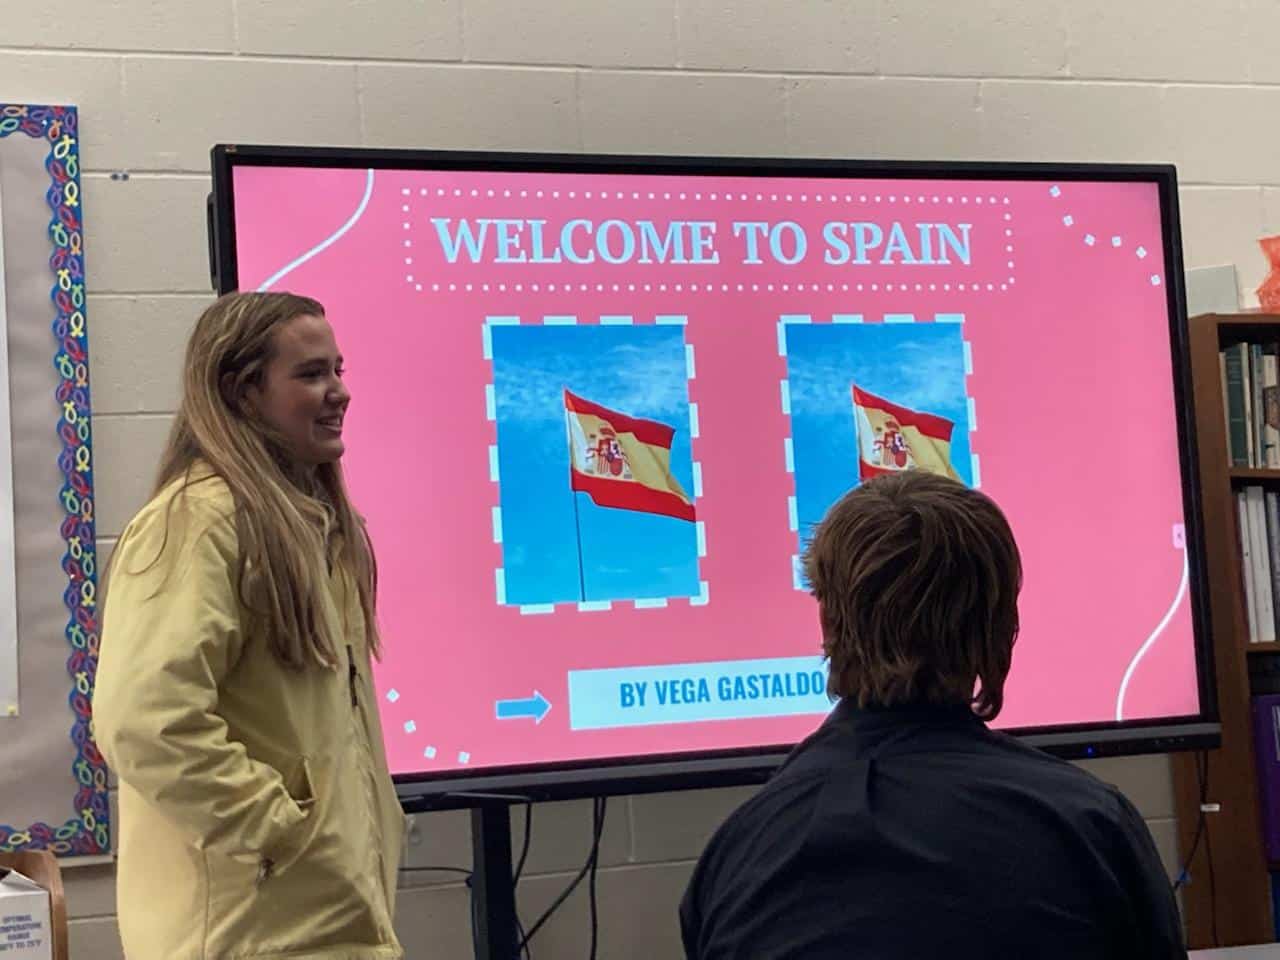 SCA International Student from Spain, Vega Gastaldo, gives a presentation during International Education Week. Vega presented in many Spanish classes, allowing students to learn more about Spanish culture and practice their language skills by asking questions in Spanish.